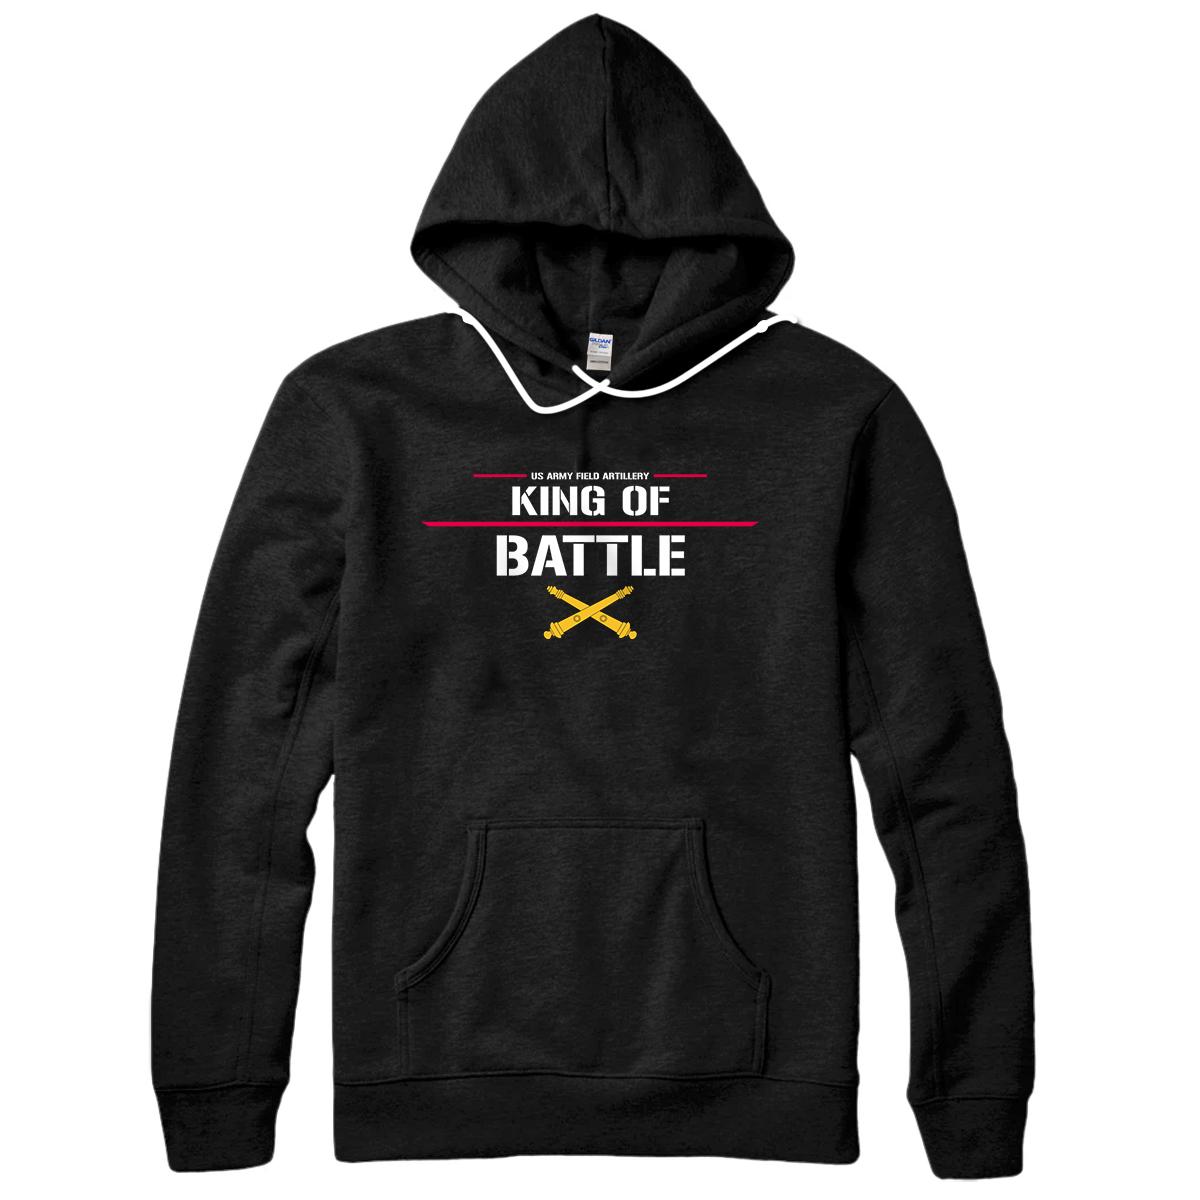 Personalized US Army Field Artillery Pullover Hoodie